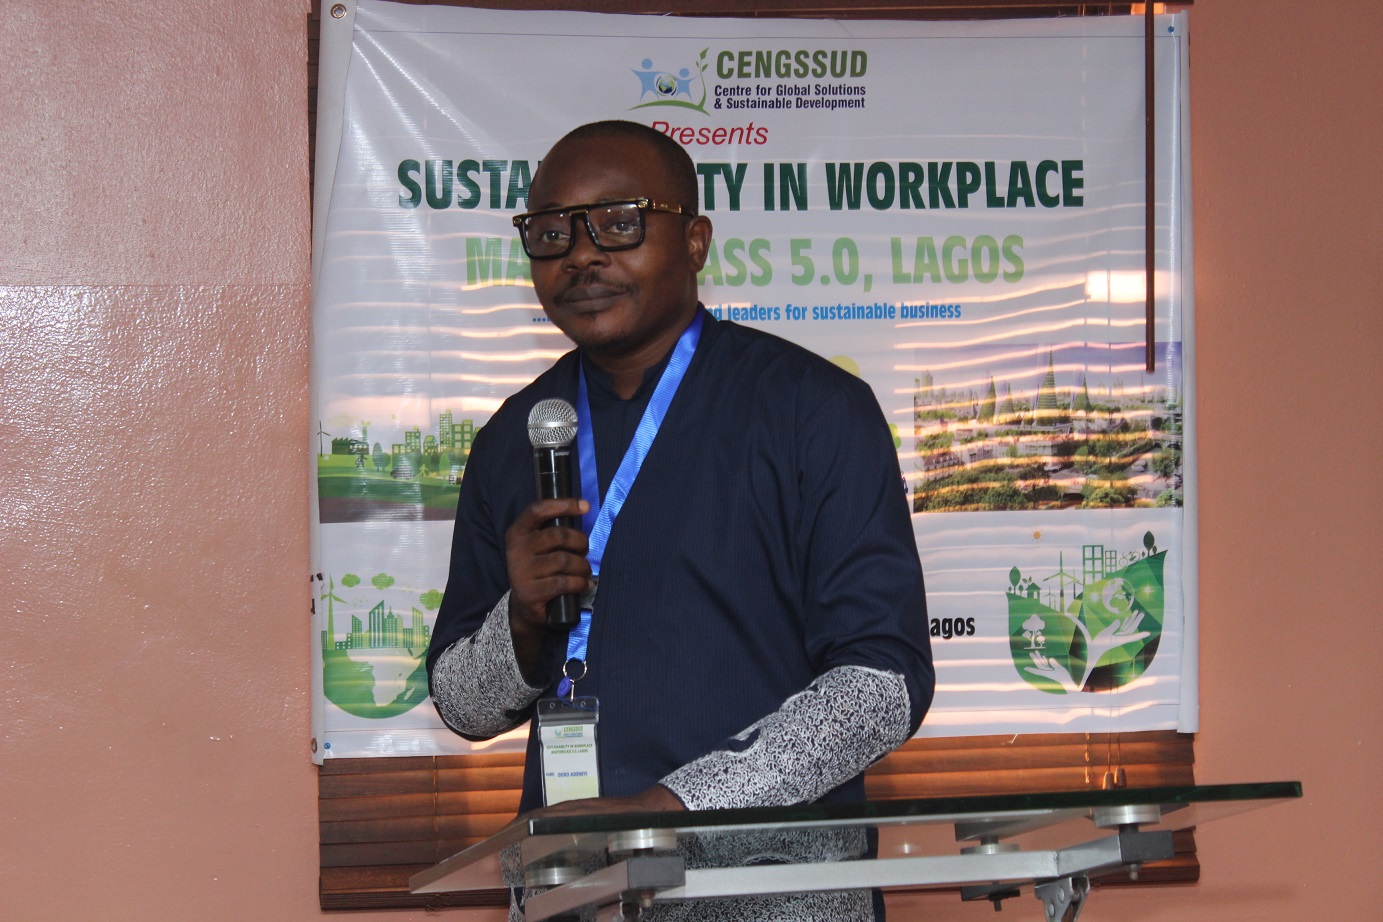 Day 1 of the Sustainability in Workplace Masterclass 5.0 Lagos